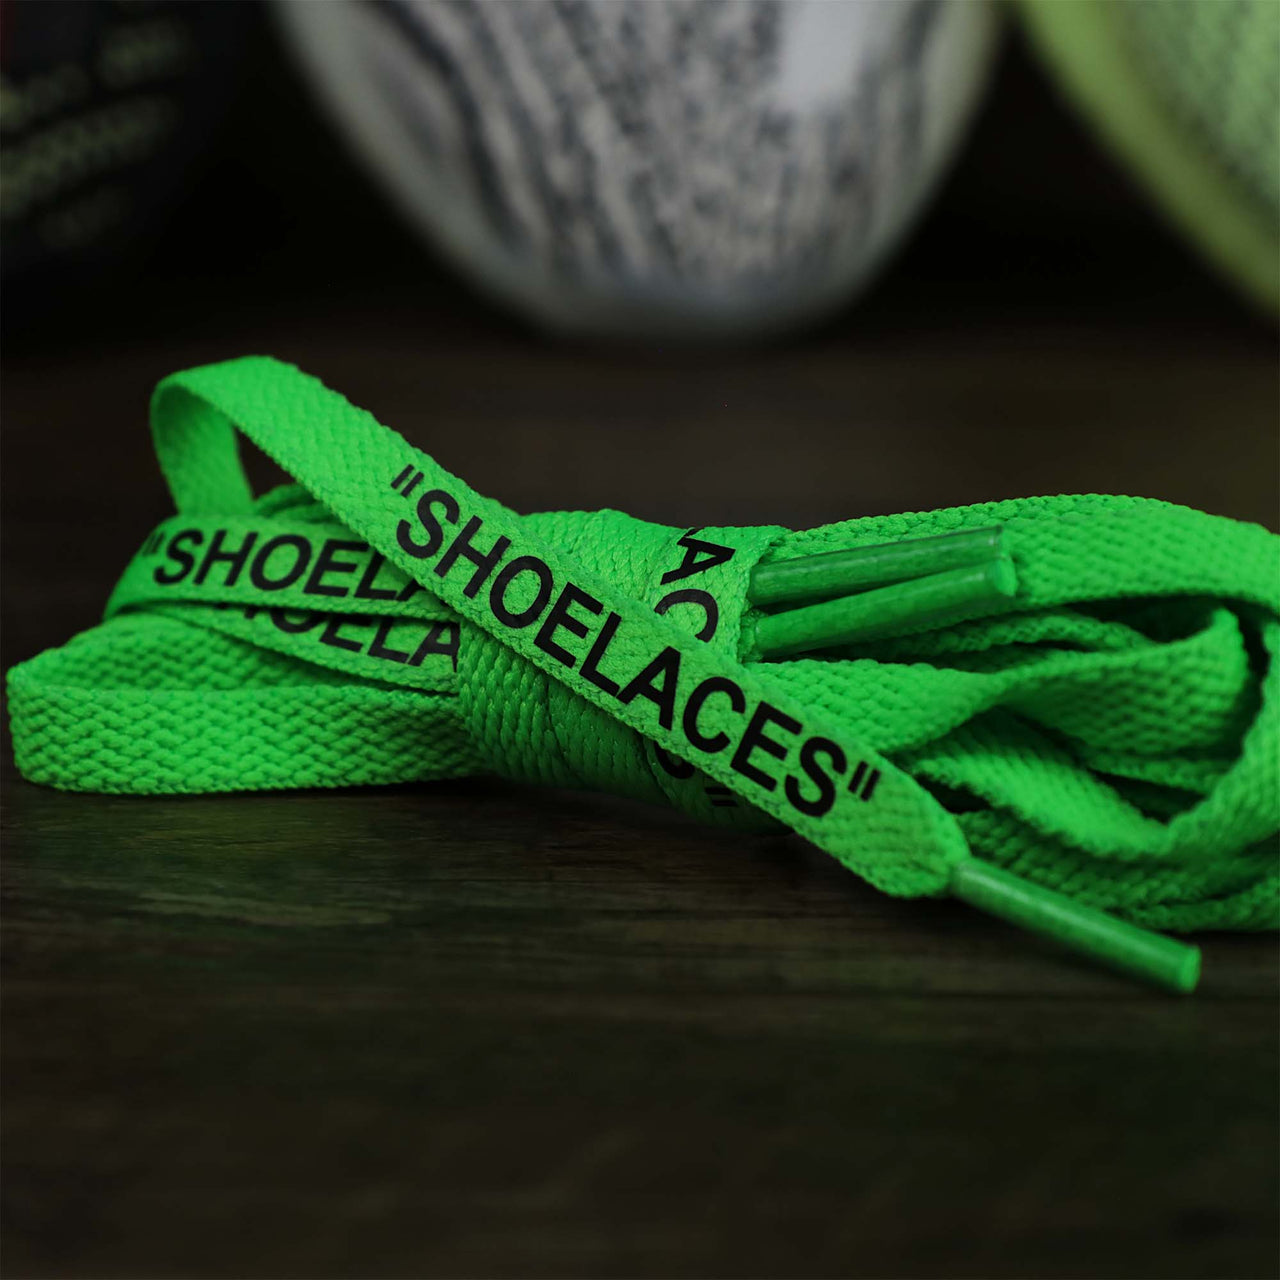 The Flat Neon Green Shoelaces with “Shoelaces” Print | 120cm Capswag